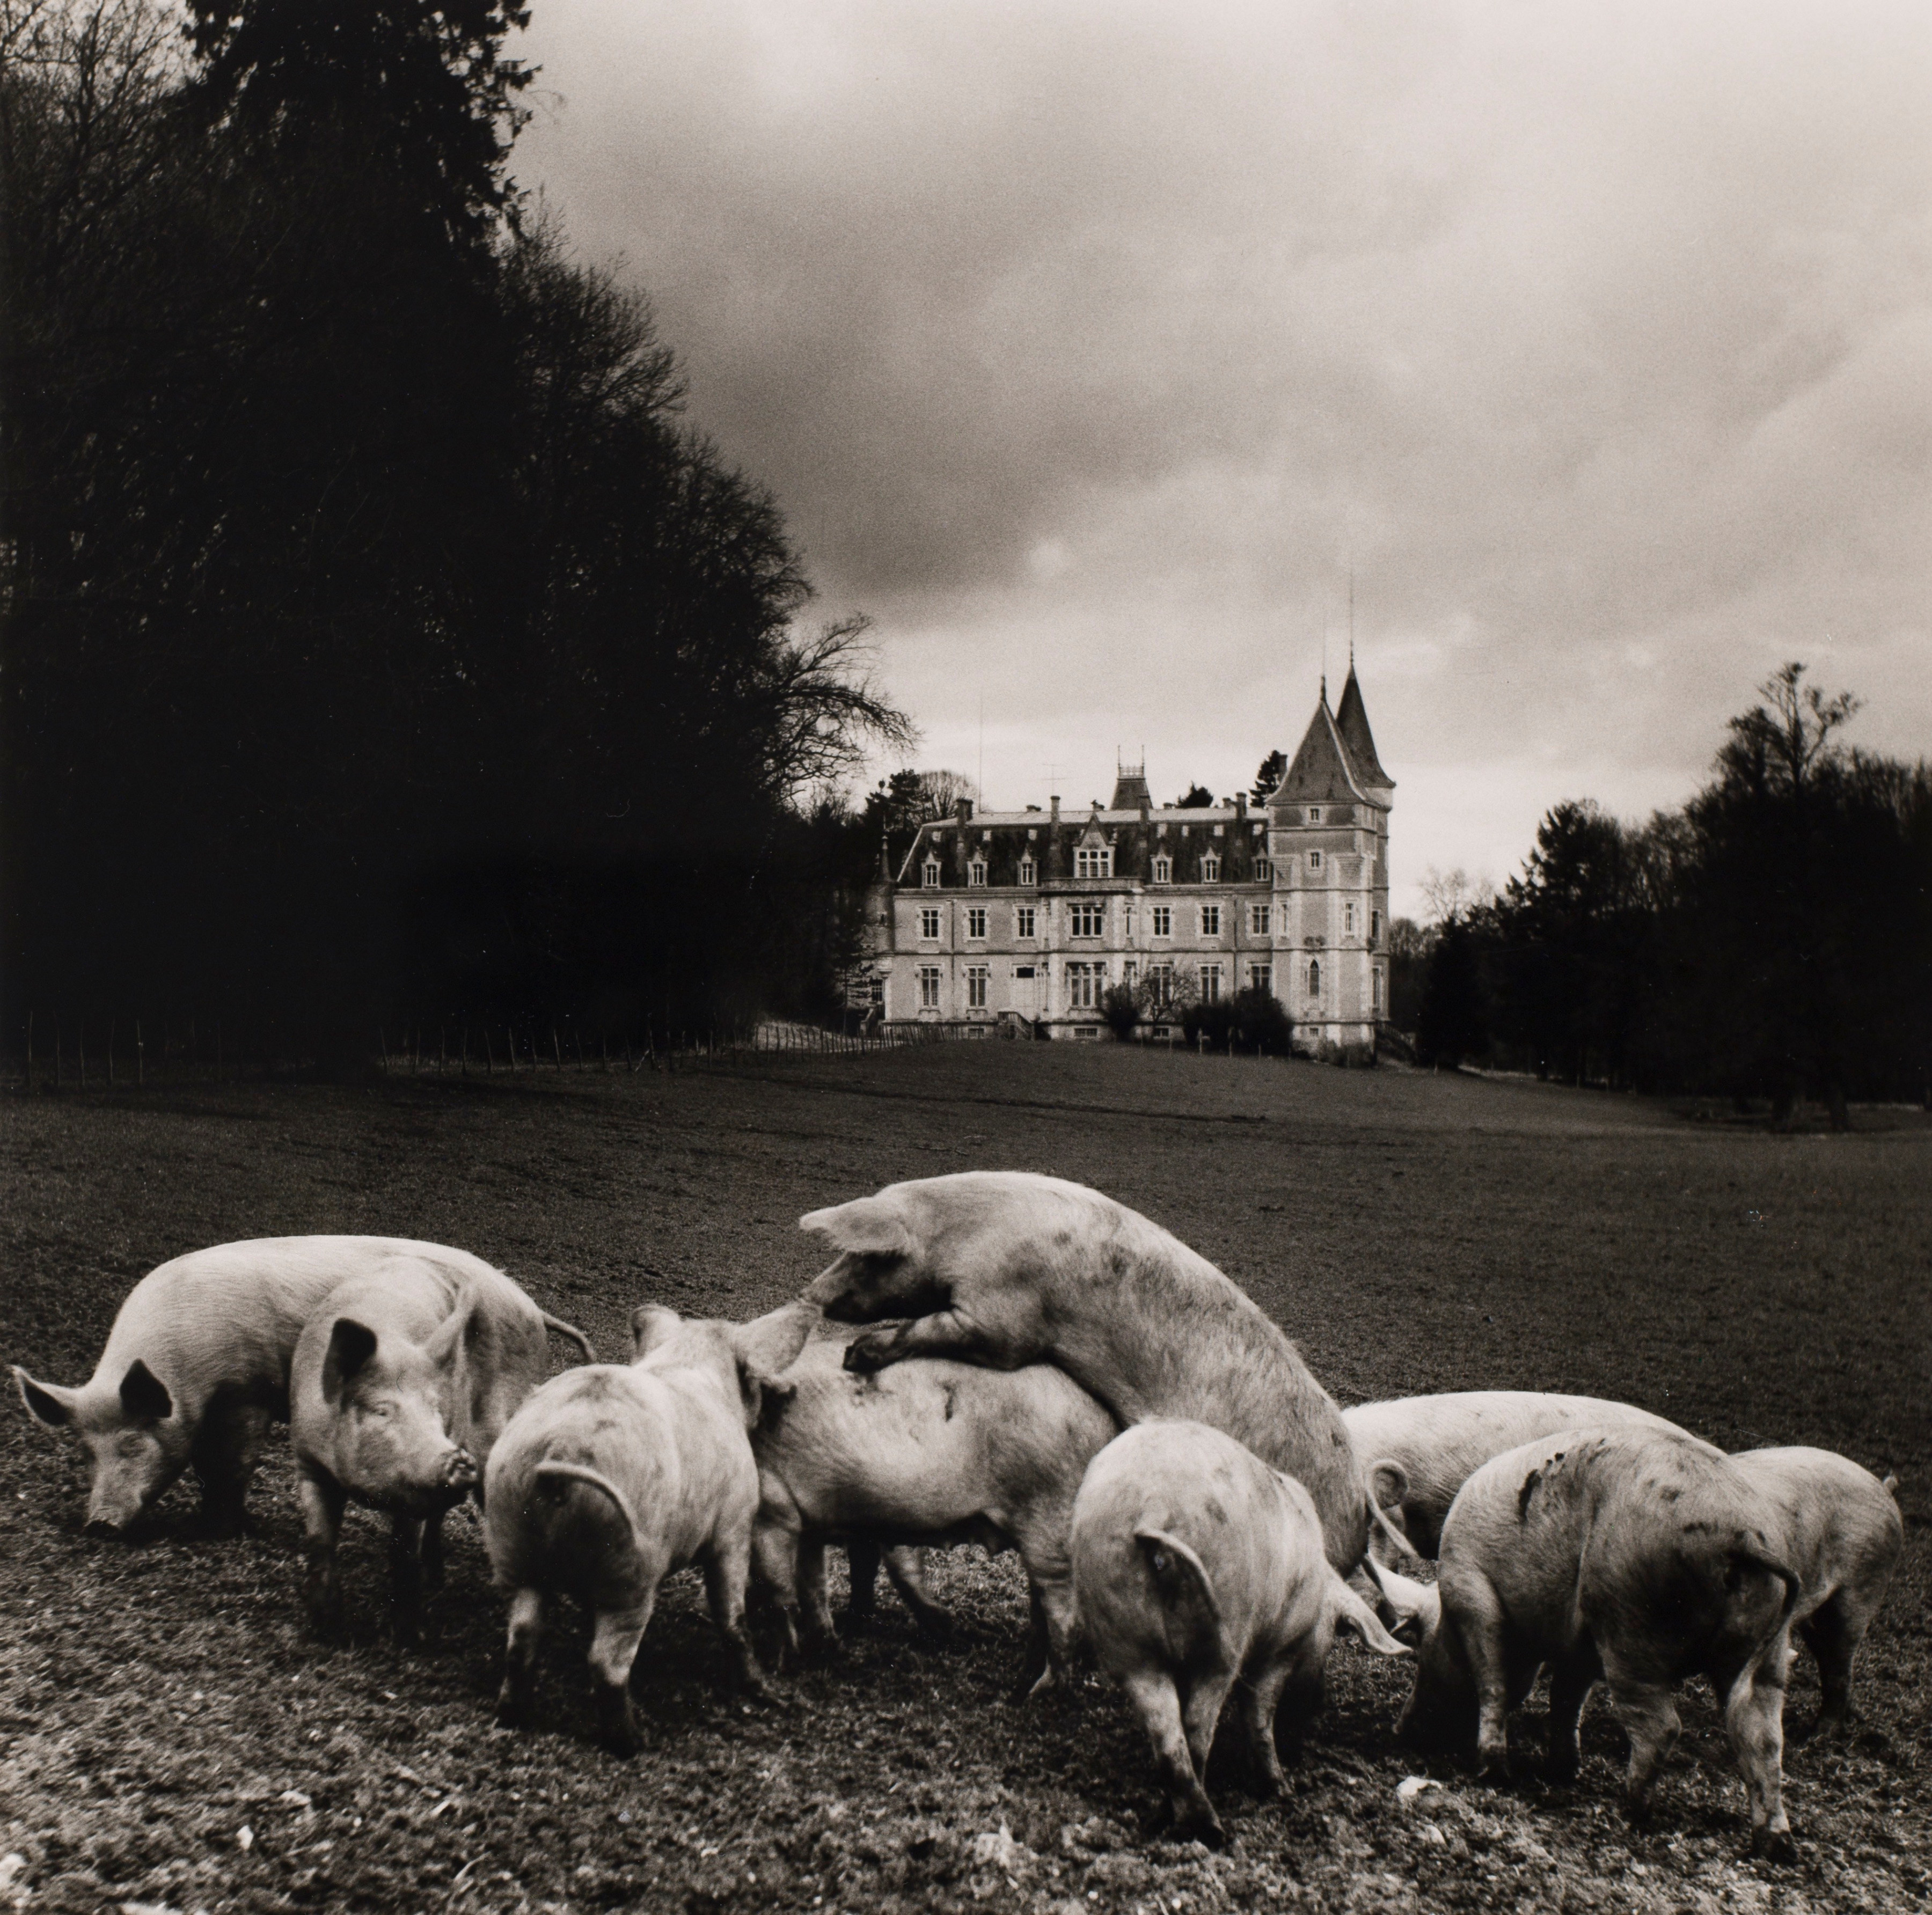 Philippe Sala&uuml;n (1943-)  Le vie de Chateau, 1973  Gelatin silver print  16 x 12 inches (paper) 10 x 10 inches (image)  PS_005, Black and White Photography